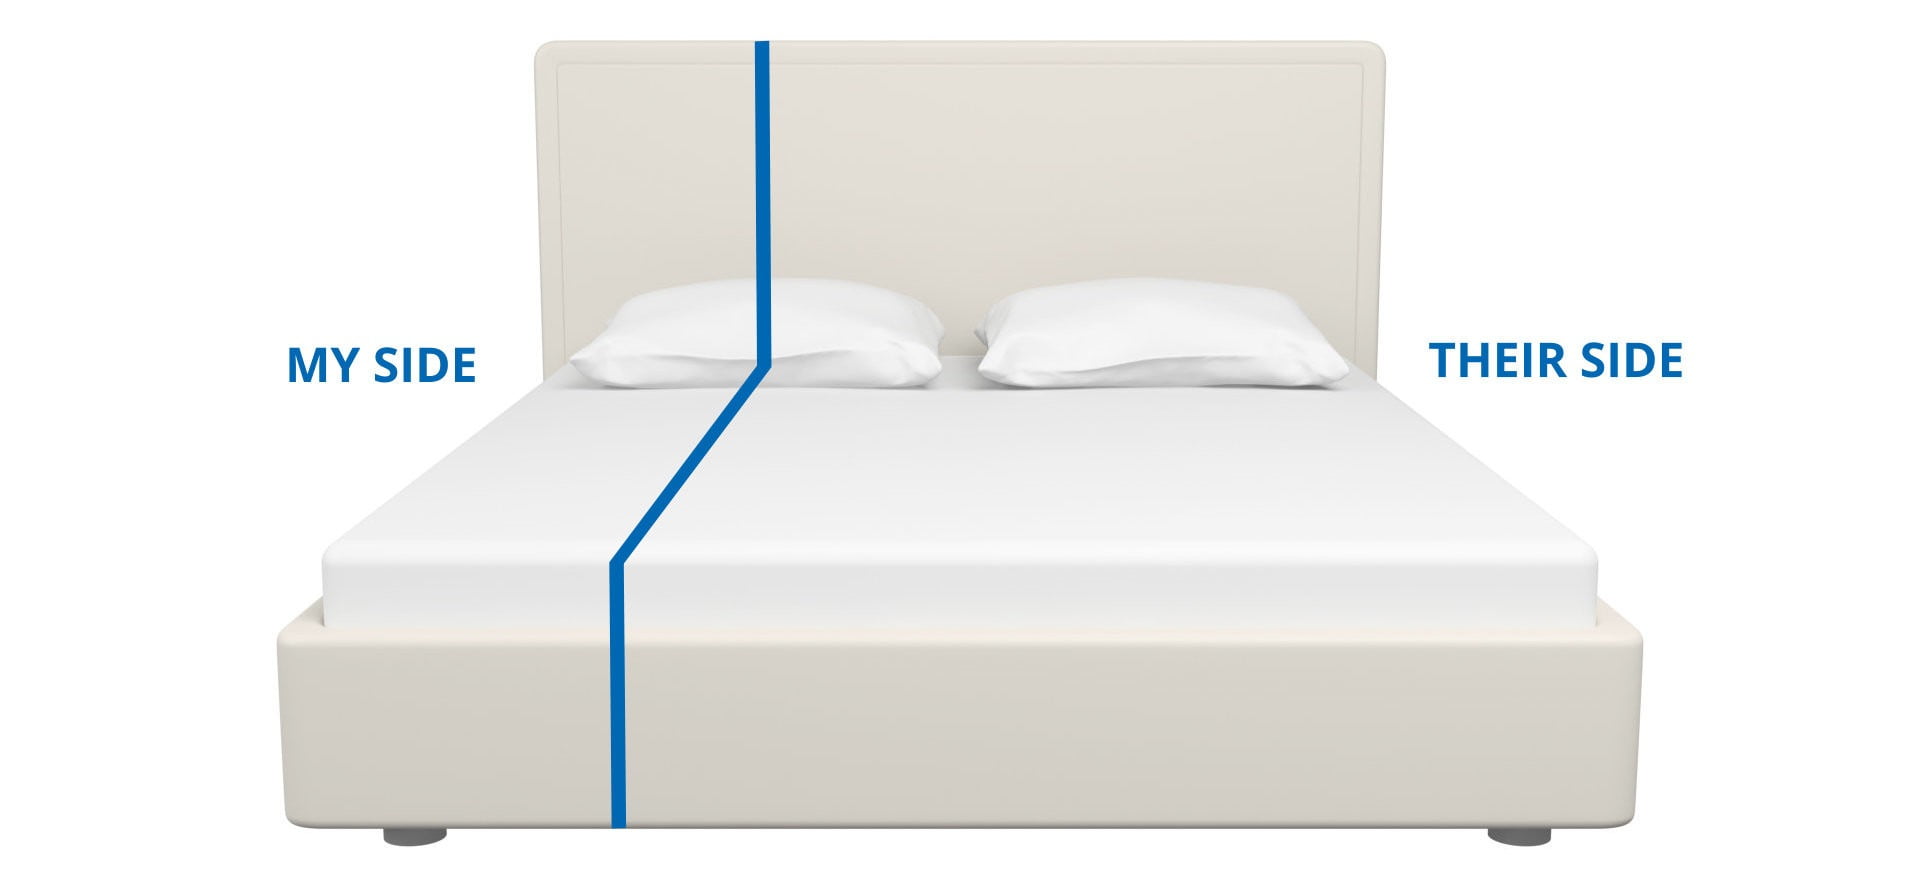 Bed Sizes Uk And Mattress Size, Bed Larger Than Super King